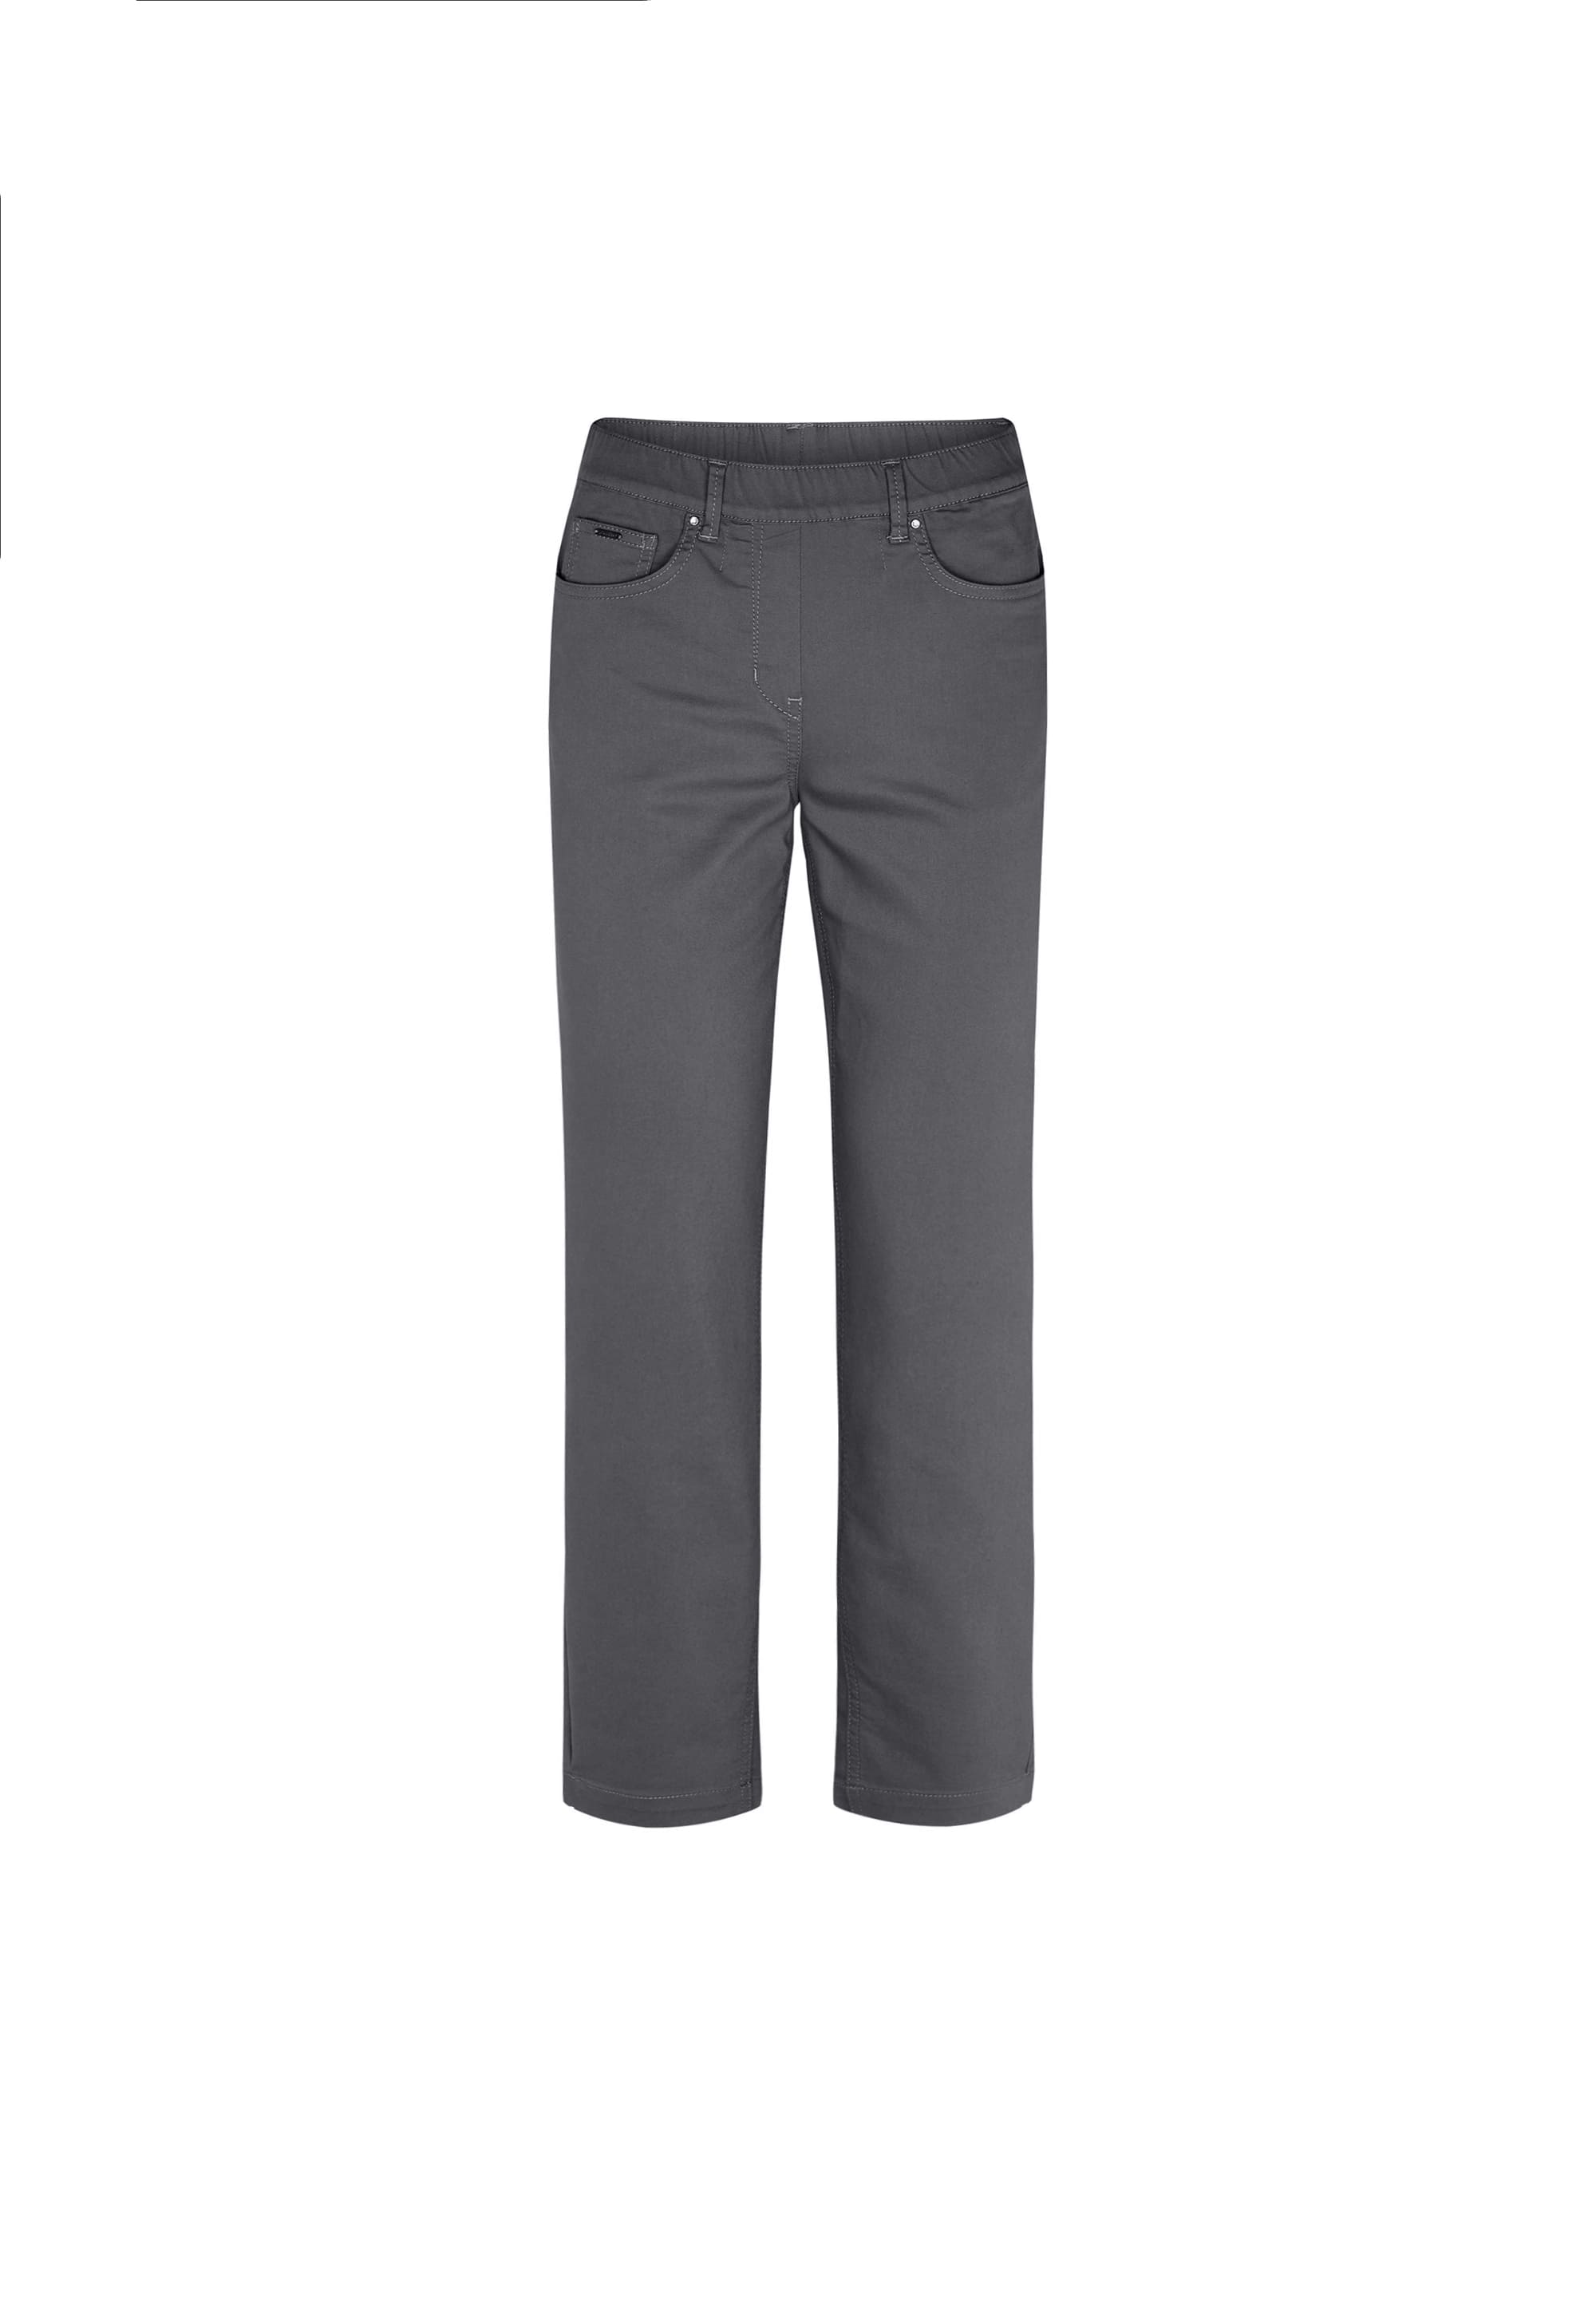 LAURIE Helen Straight - Medium Length Trousers STRAIGHT 97000 Anthracite